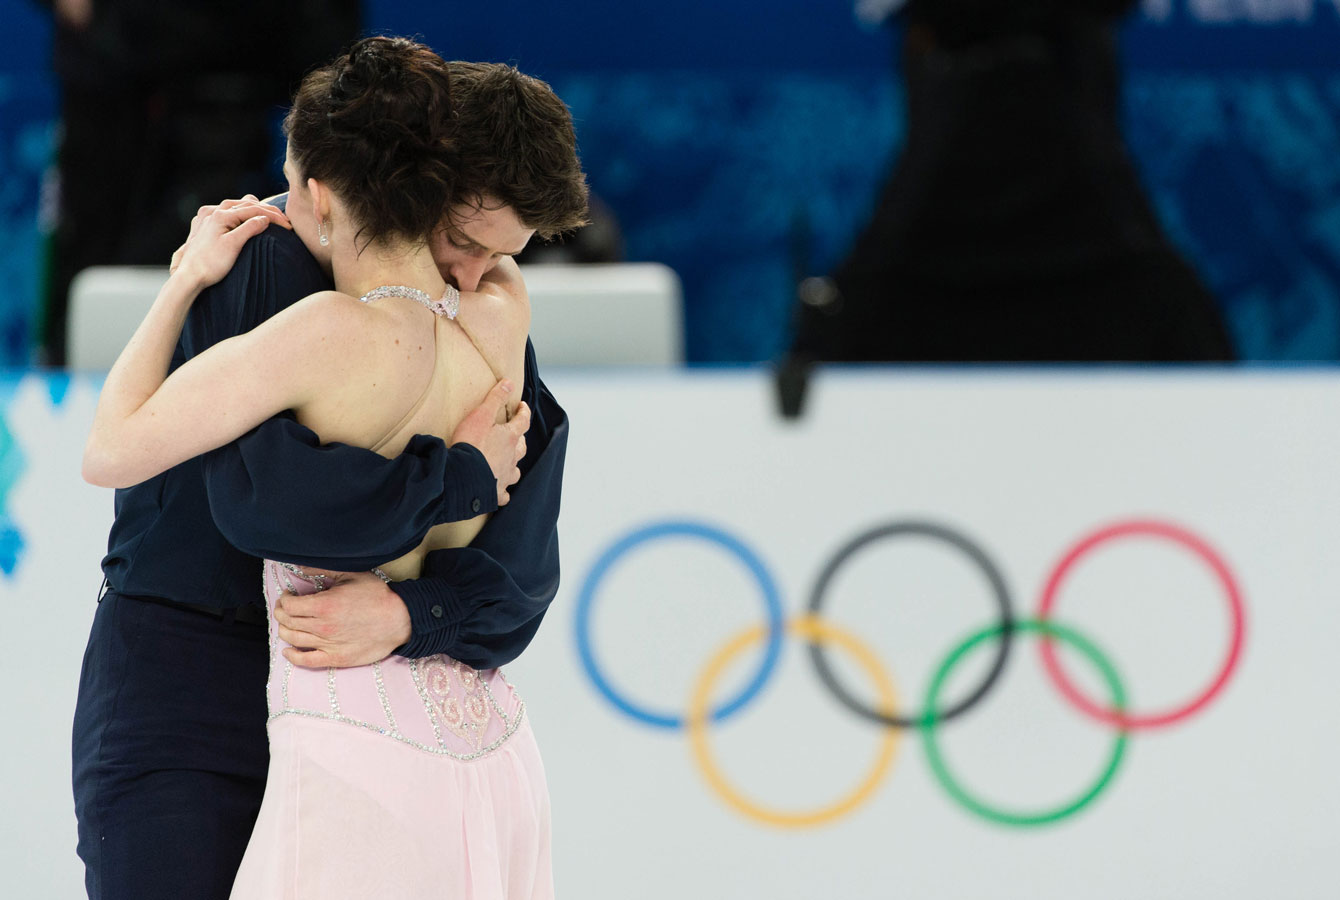 Tessa Virtue and Scott Moir at the conclusion of their Sochi 2014 Olympic program at Iceberg Skating Palace.